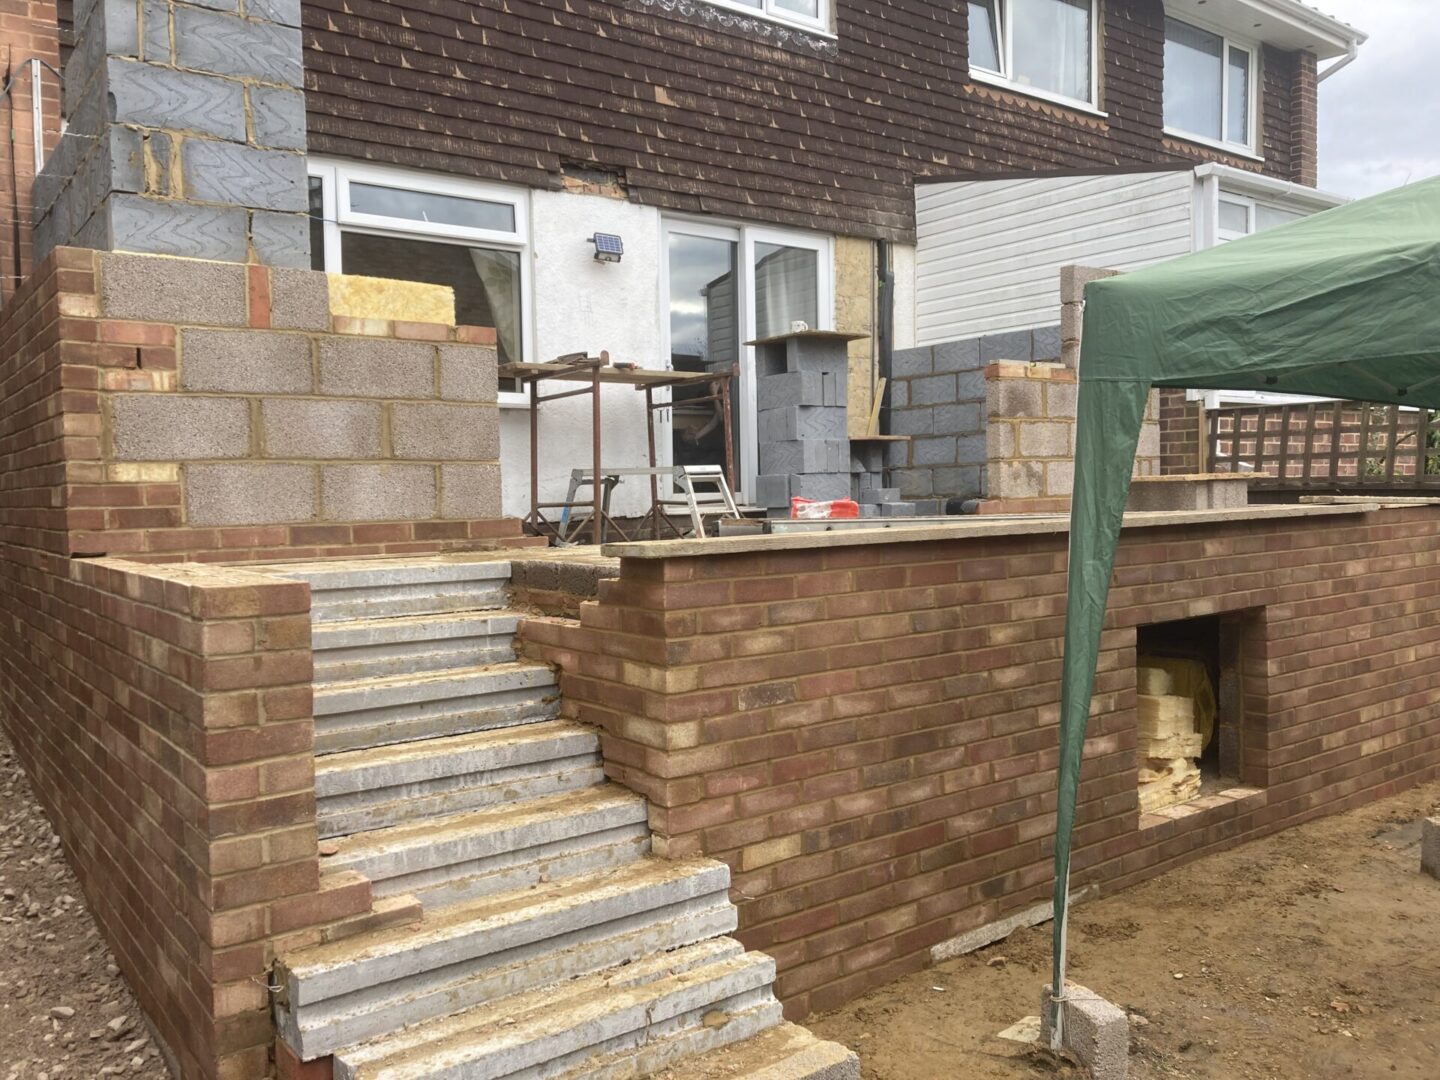 new stair way to porch in backyard with brick structures